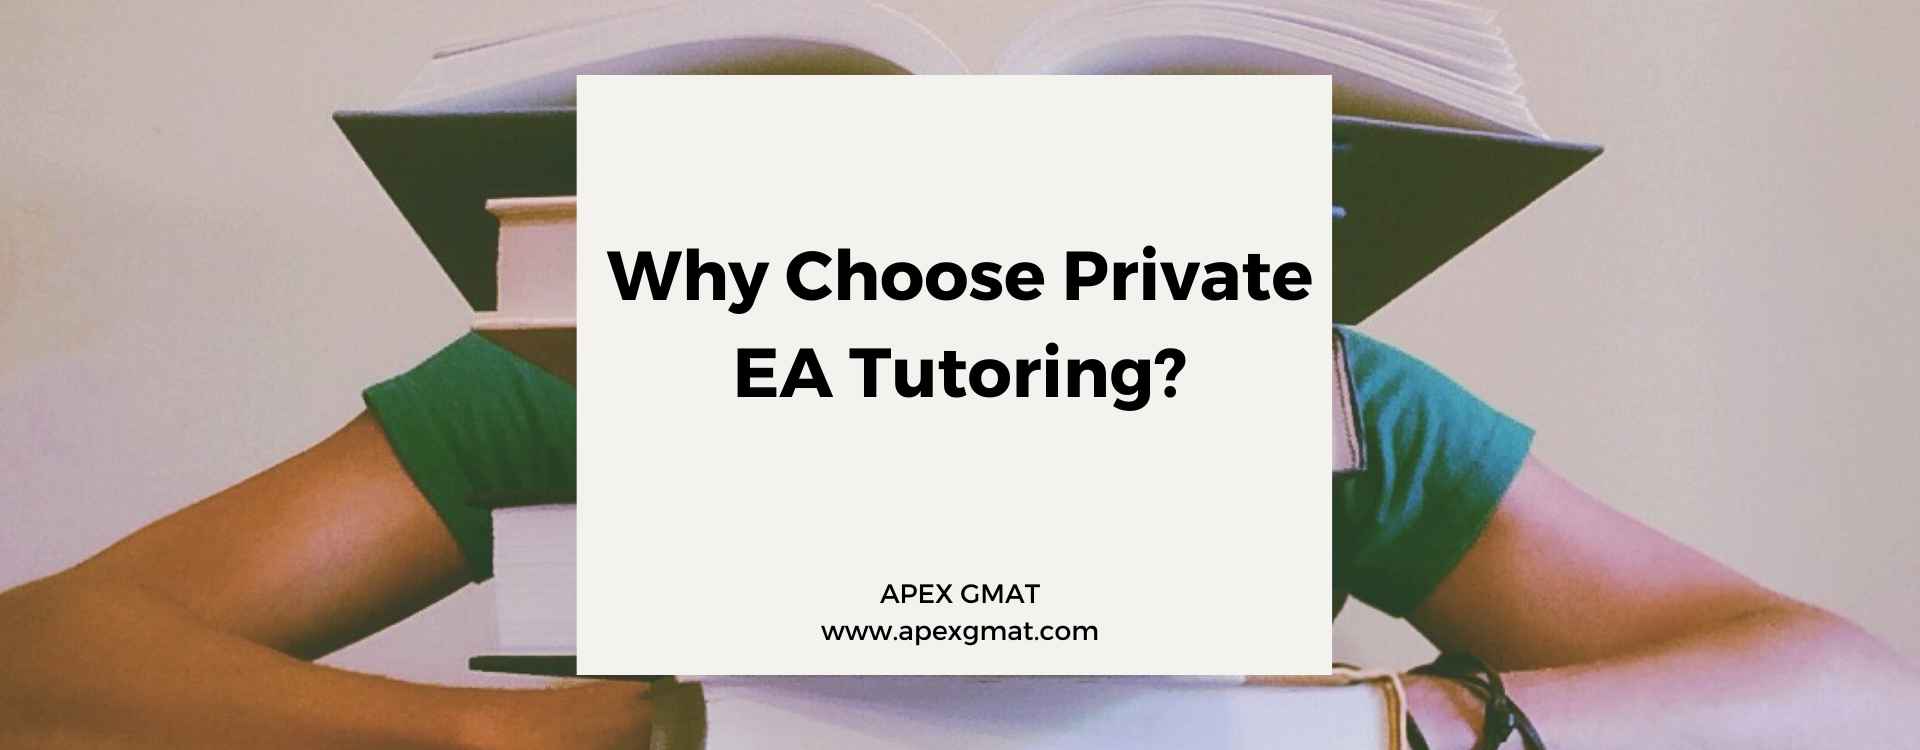 Why Choose Private EA Tutoring?